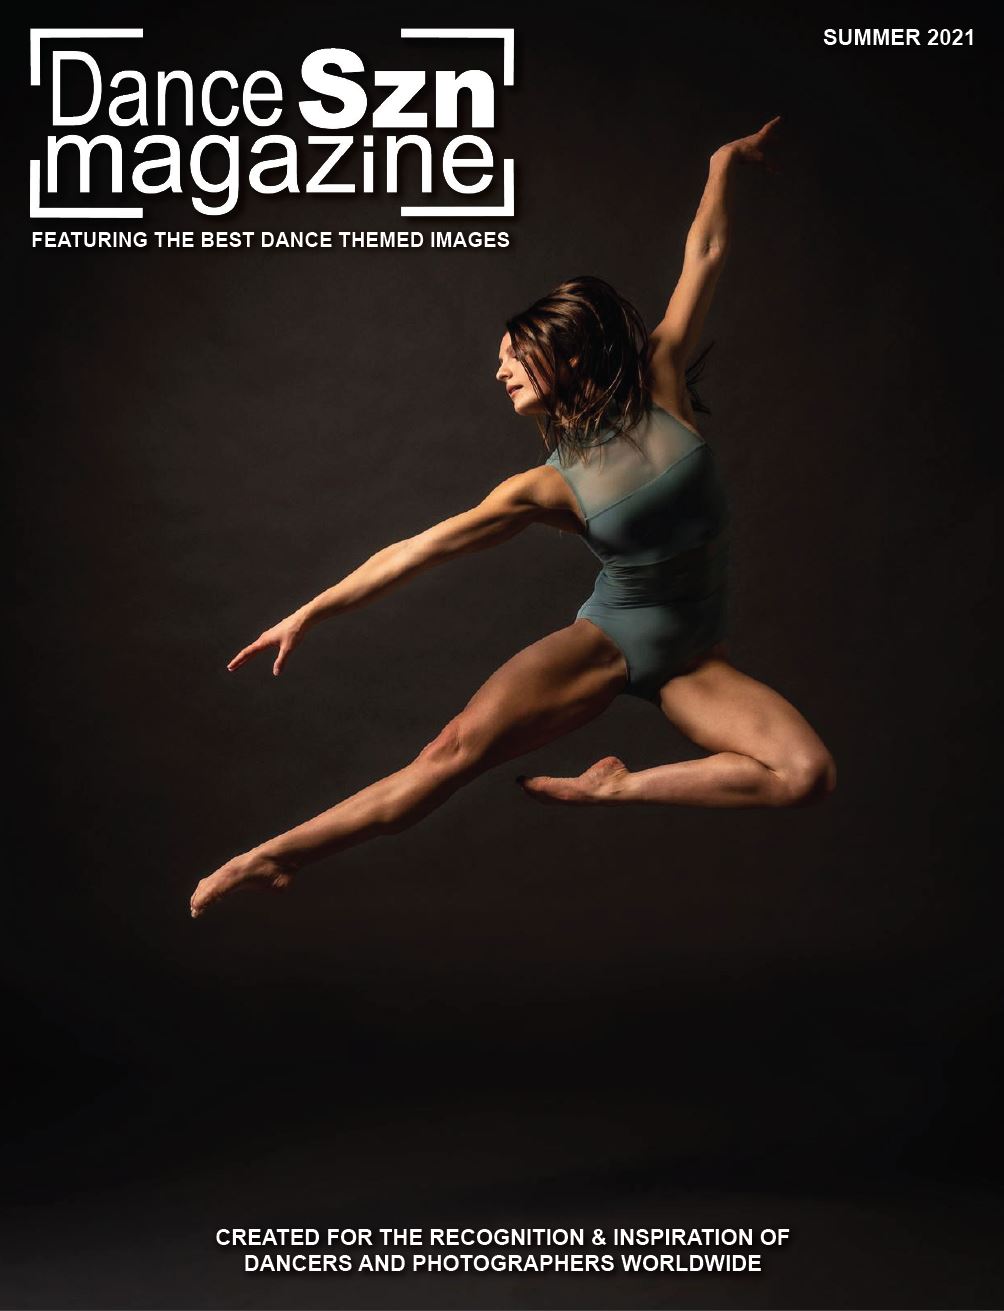 Magazine cover with girl up in the air and arms up